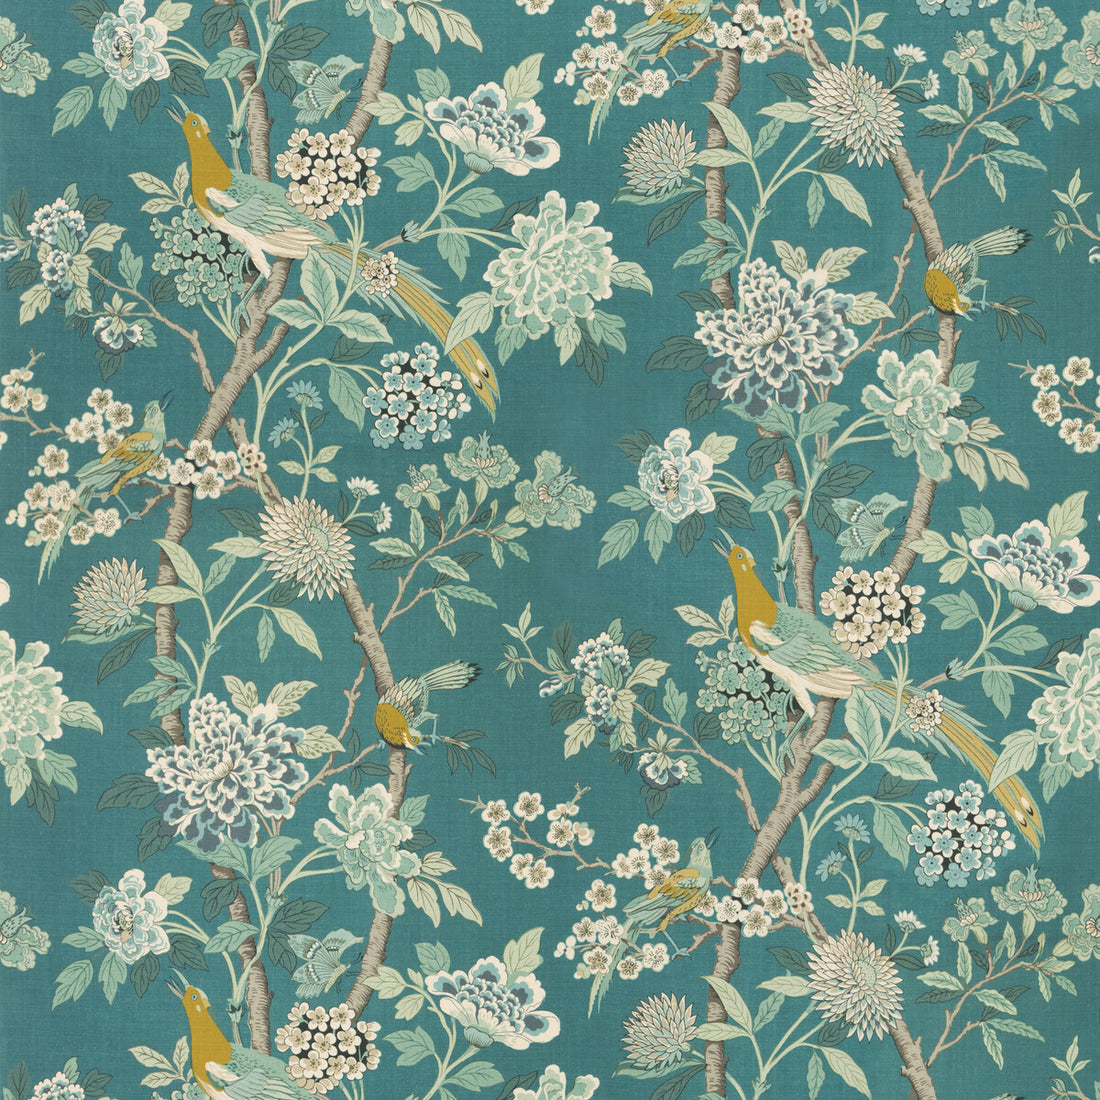 Hydrangea Bird - Archive fabric in teal color - pattern BP10851.5.0 - by G P &amp; J Baker in the Chifu collection